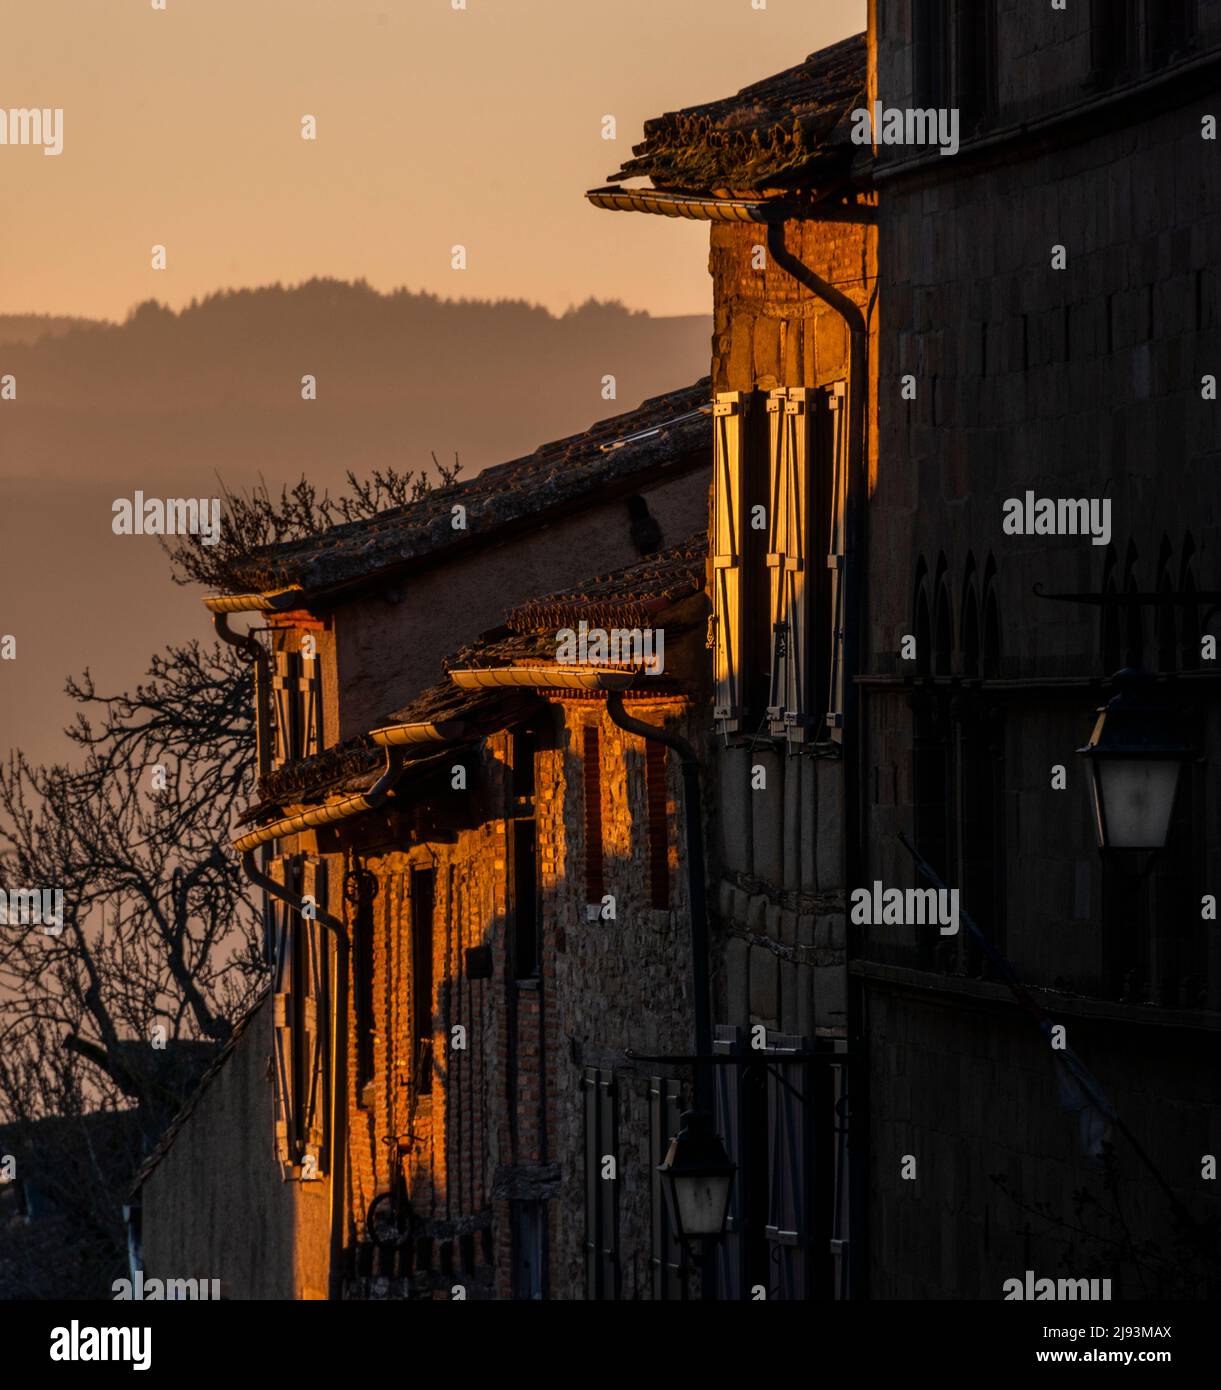 Sunset illuminating the facades of houses in the medieval hilltop village of Cordes-sur-Ciel in the Tarn department of Occitanie, France. Stock Photo